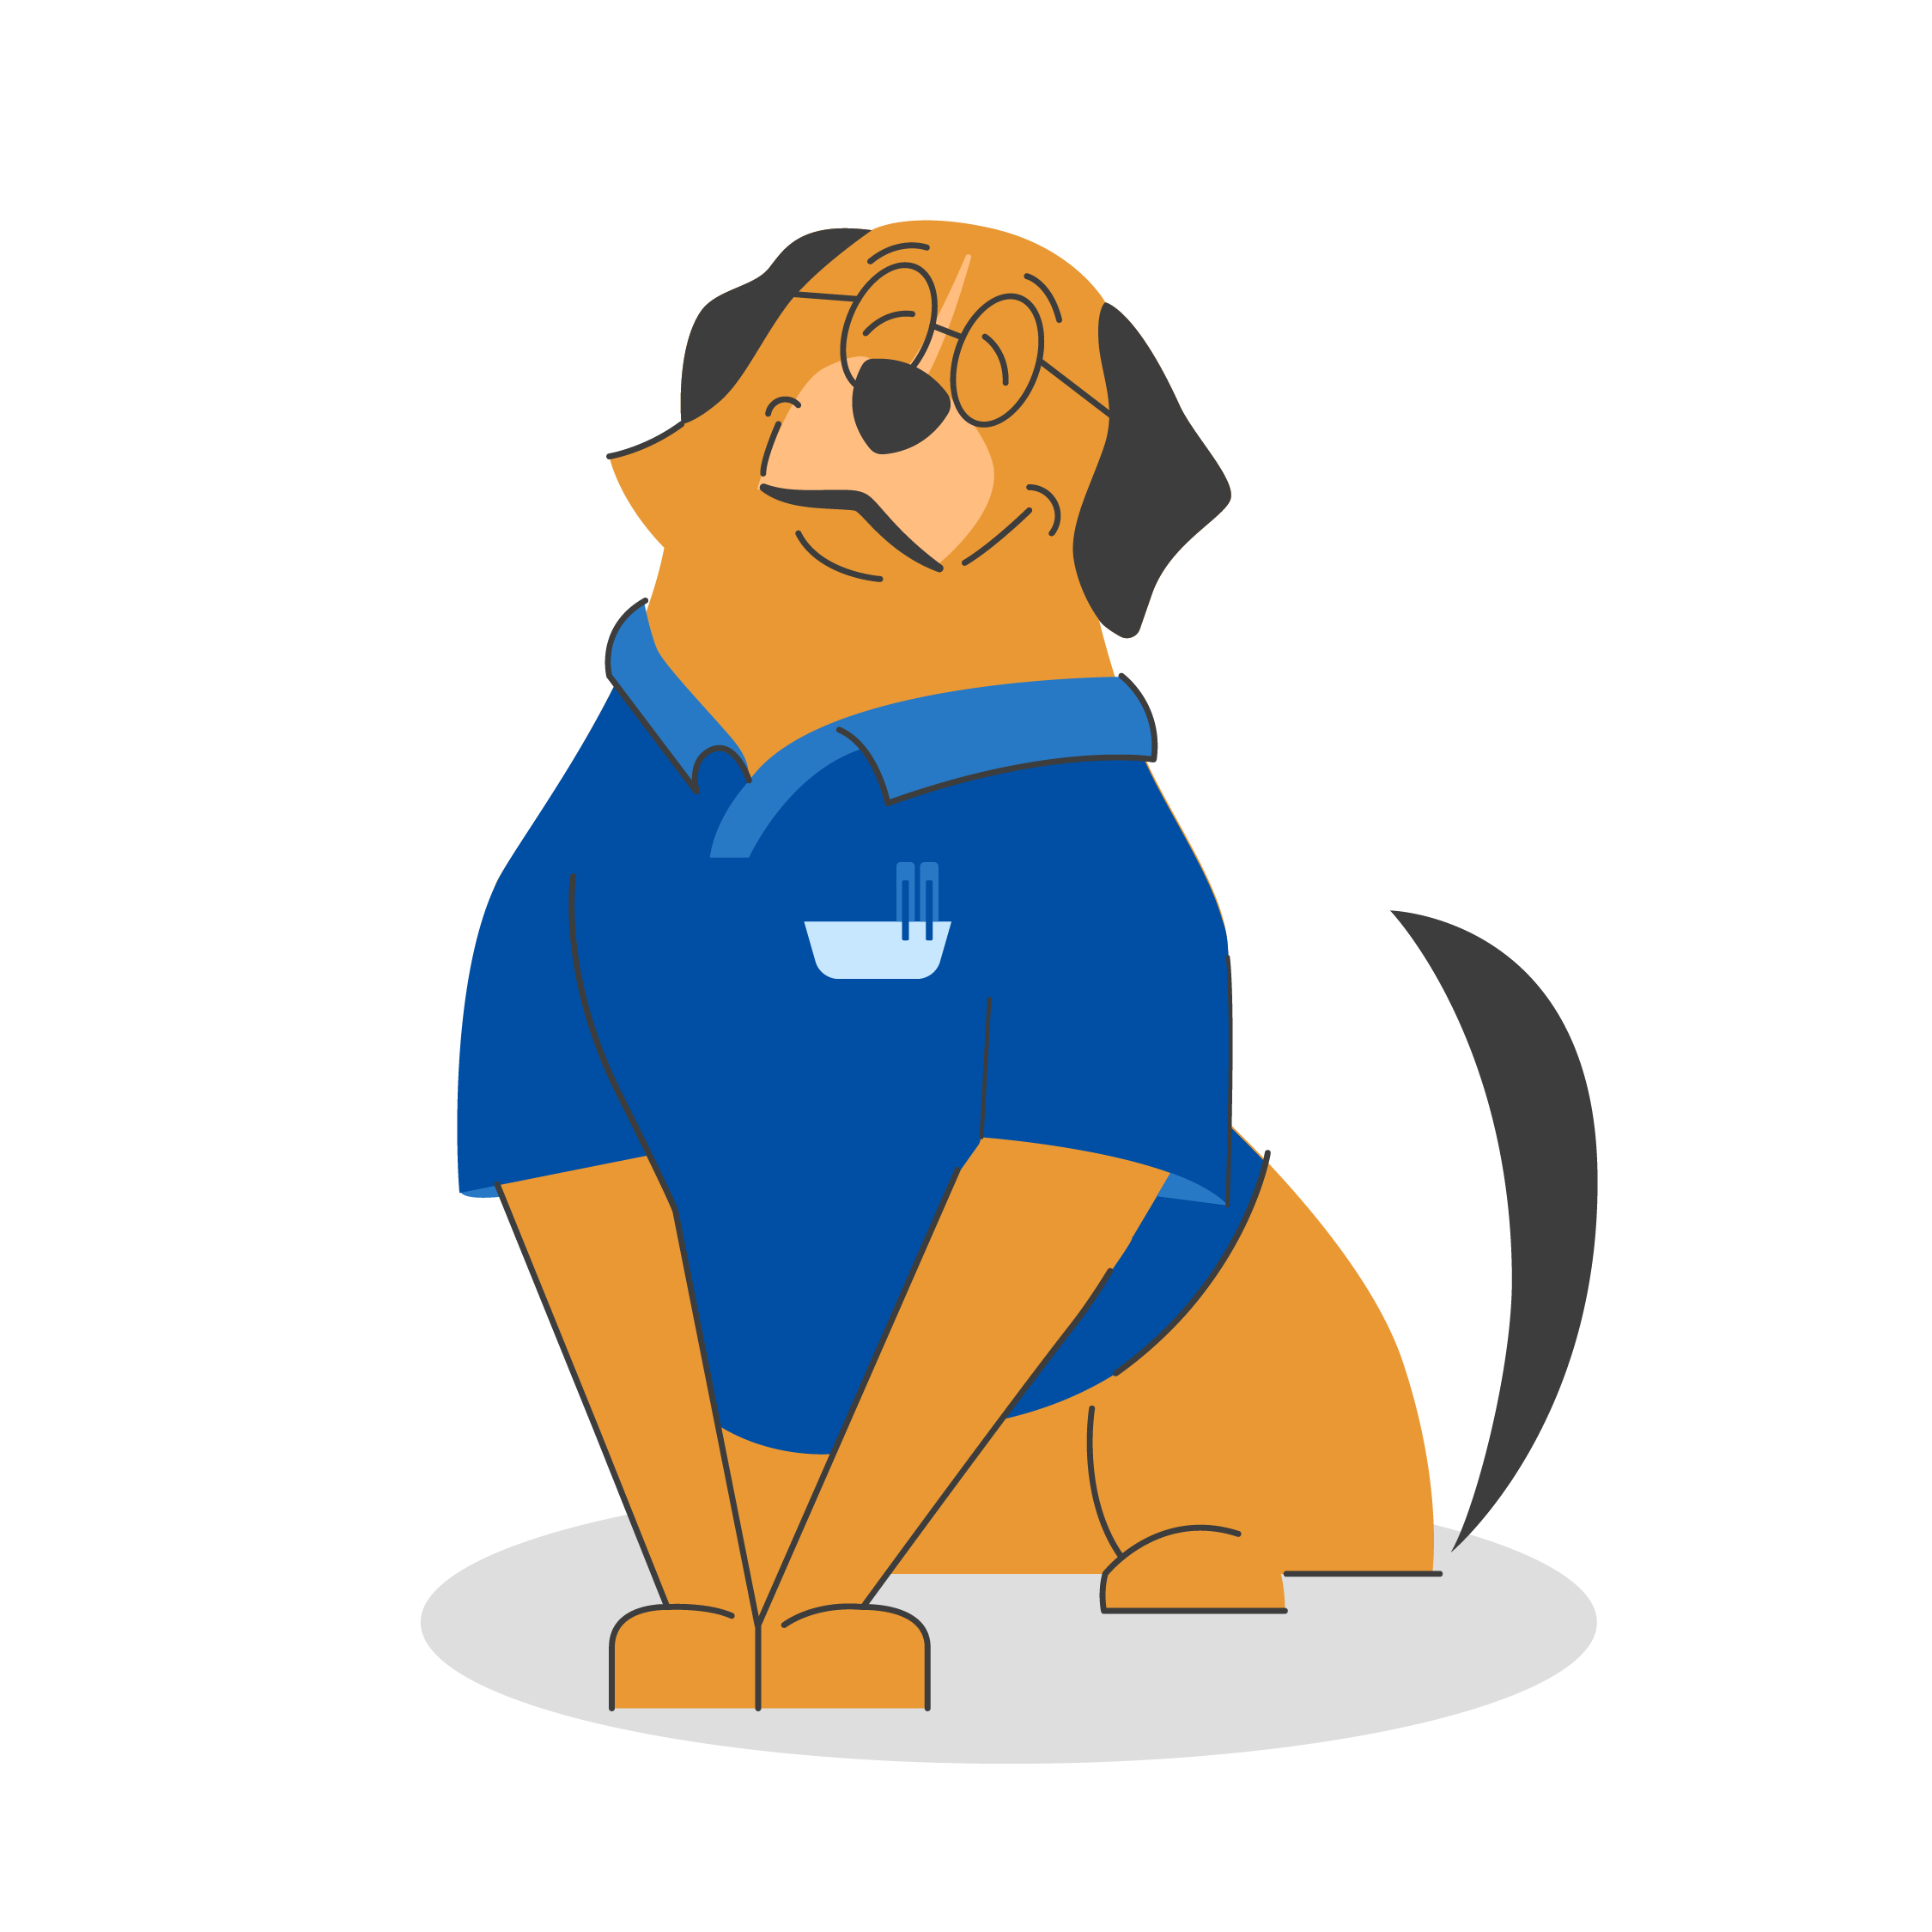 animated brown dog wearing a blue collared tee, sitting and smiling with glasses one